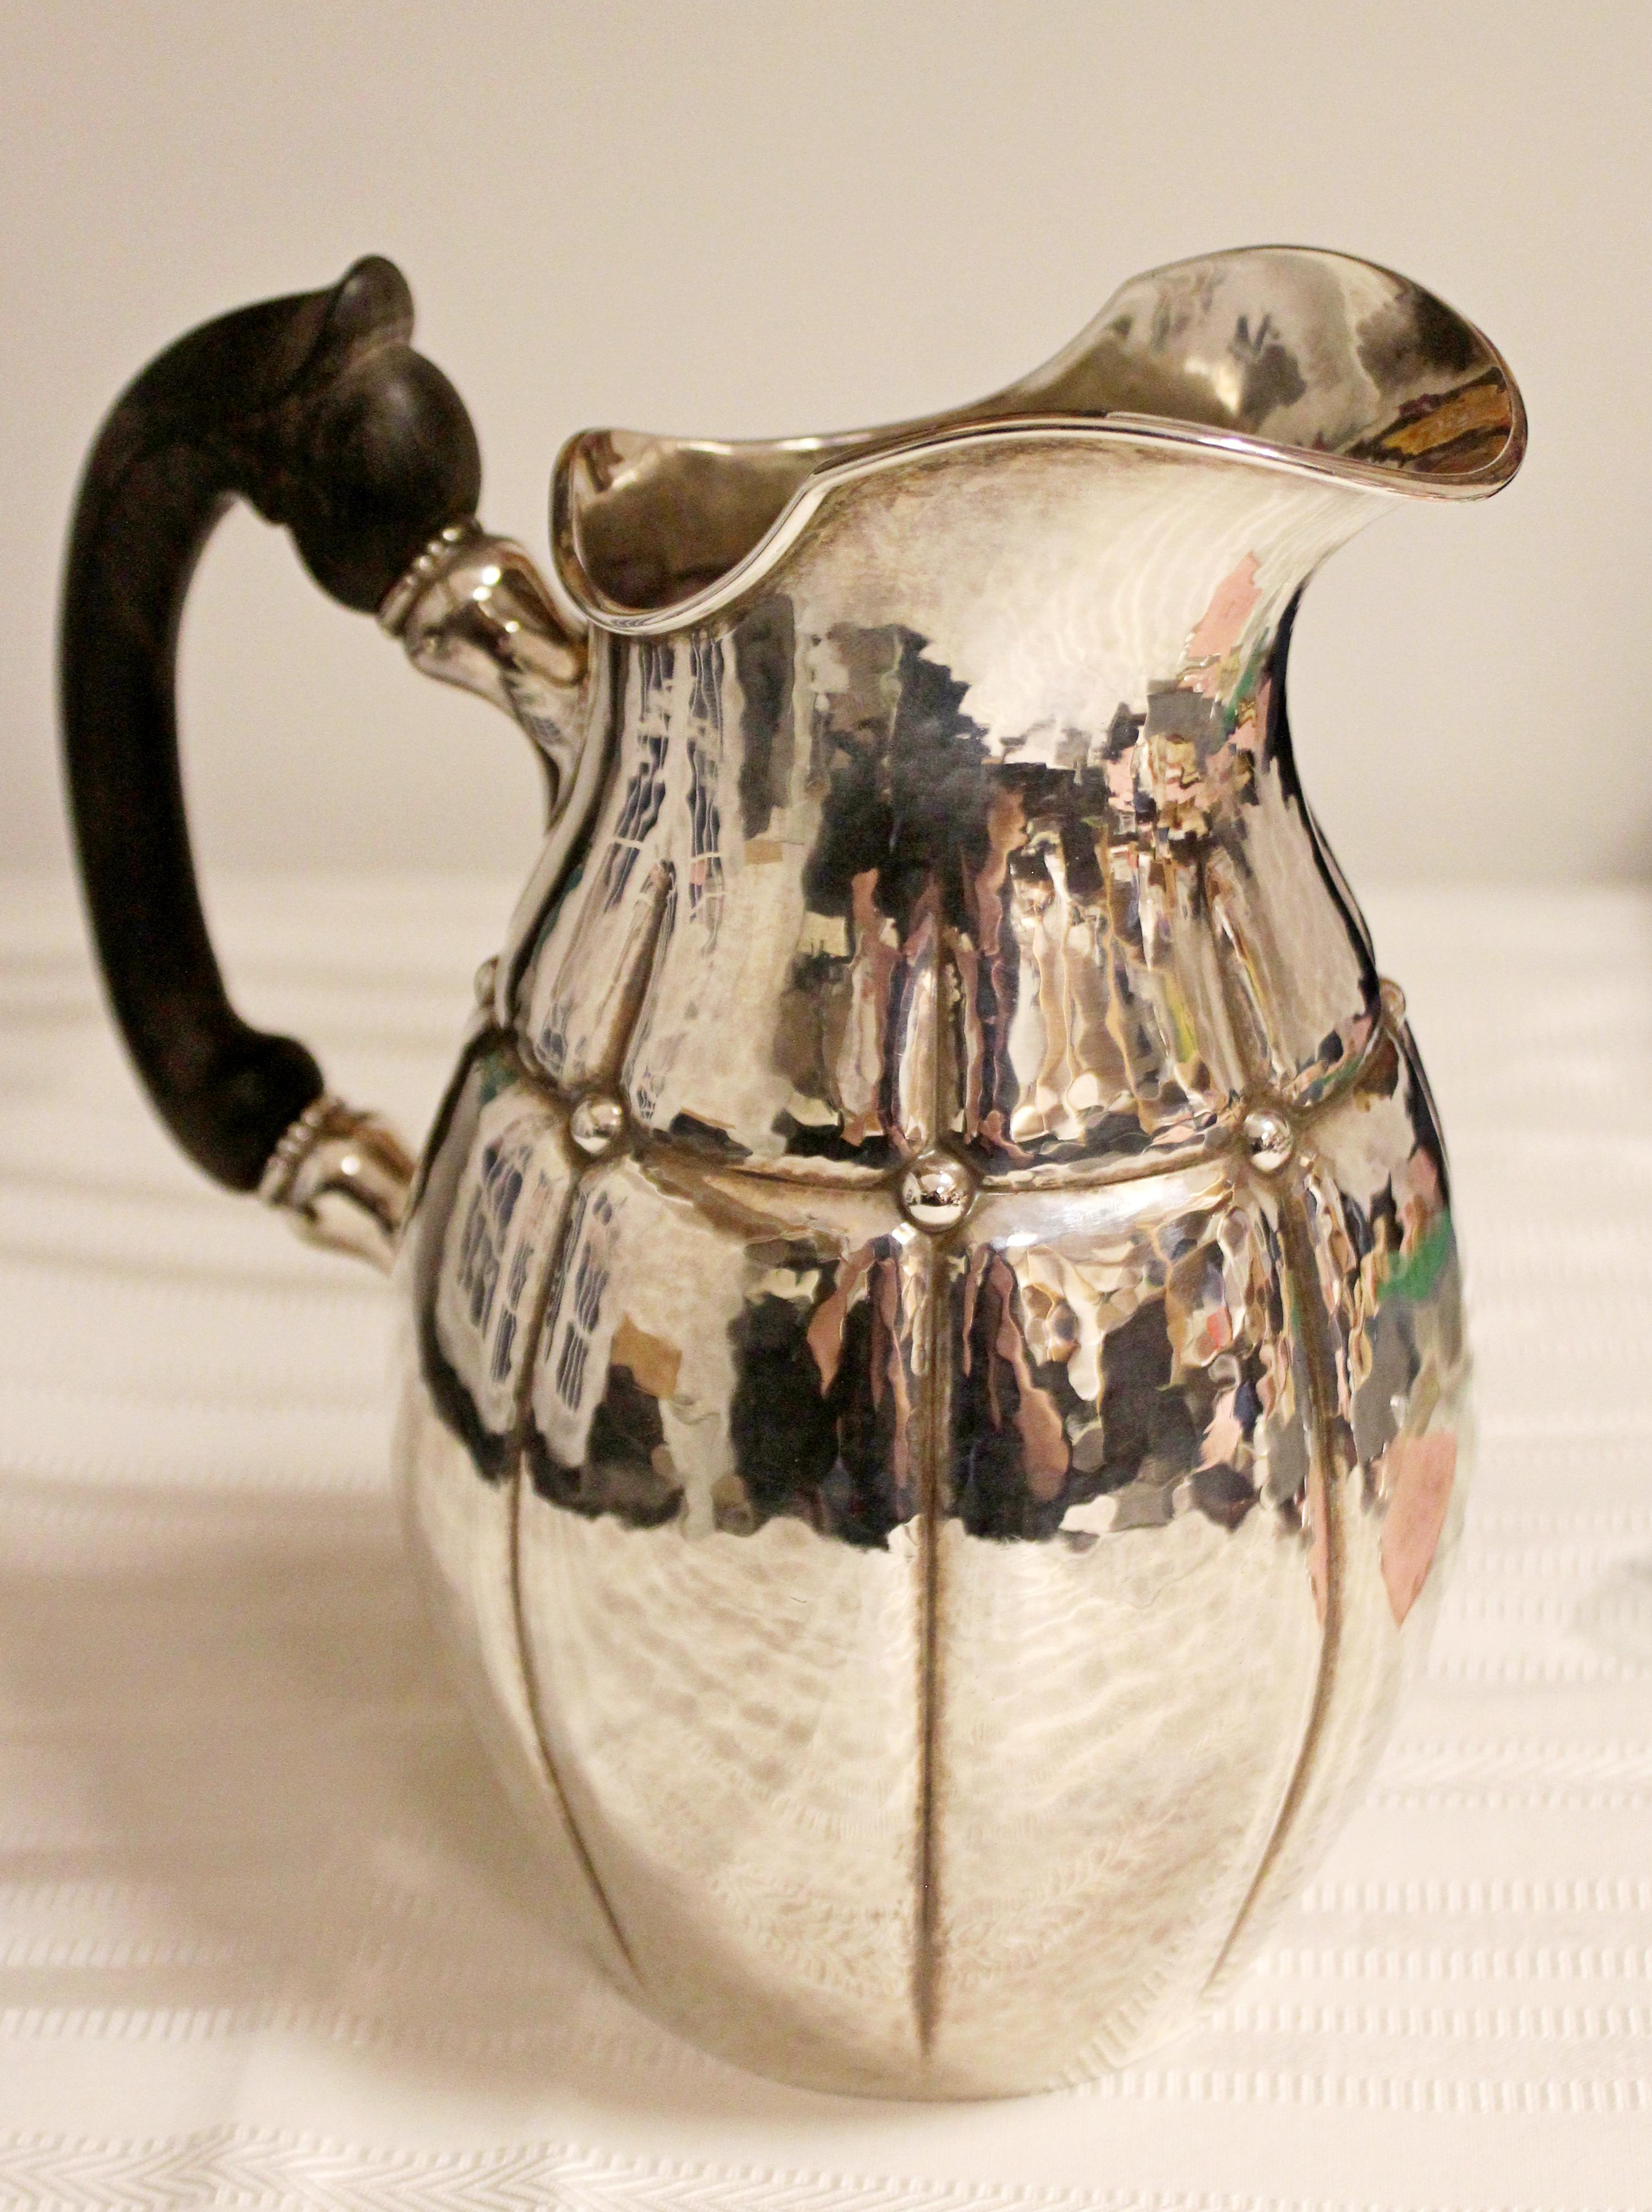 For your consideration is a stunning rare early silver pitcher, Carl Cohr in the style of Georg Jensen,  with a wood handle, stamped, made in Denmark. In excellent condition. The dimensions are 6.75